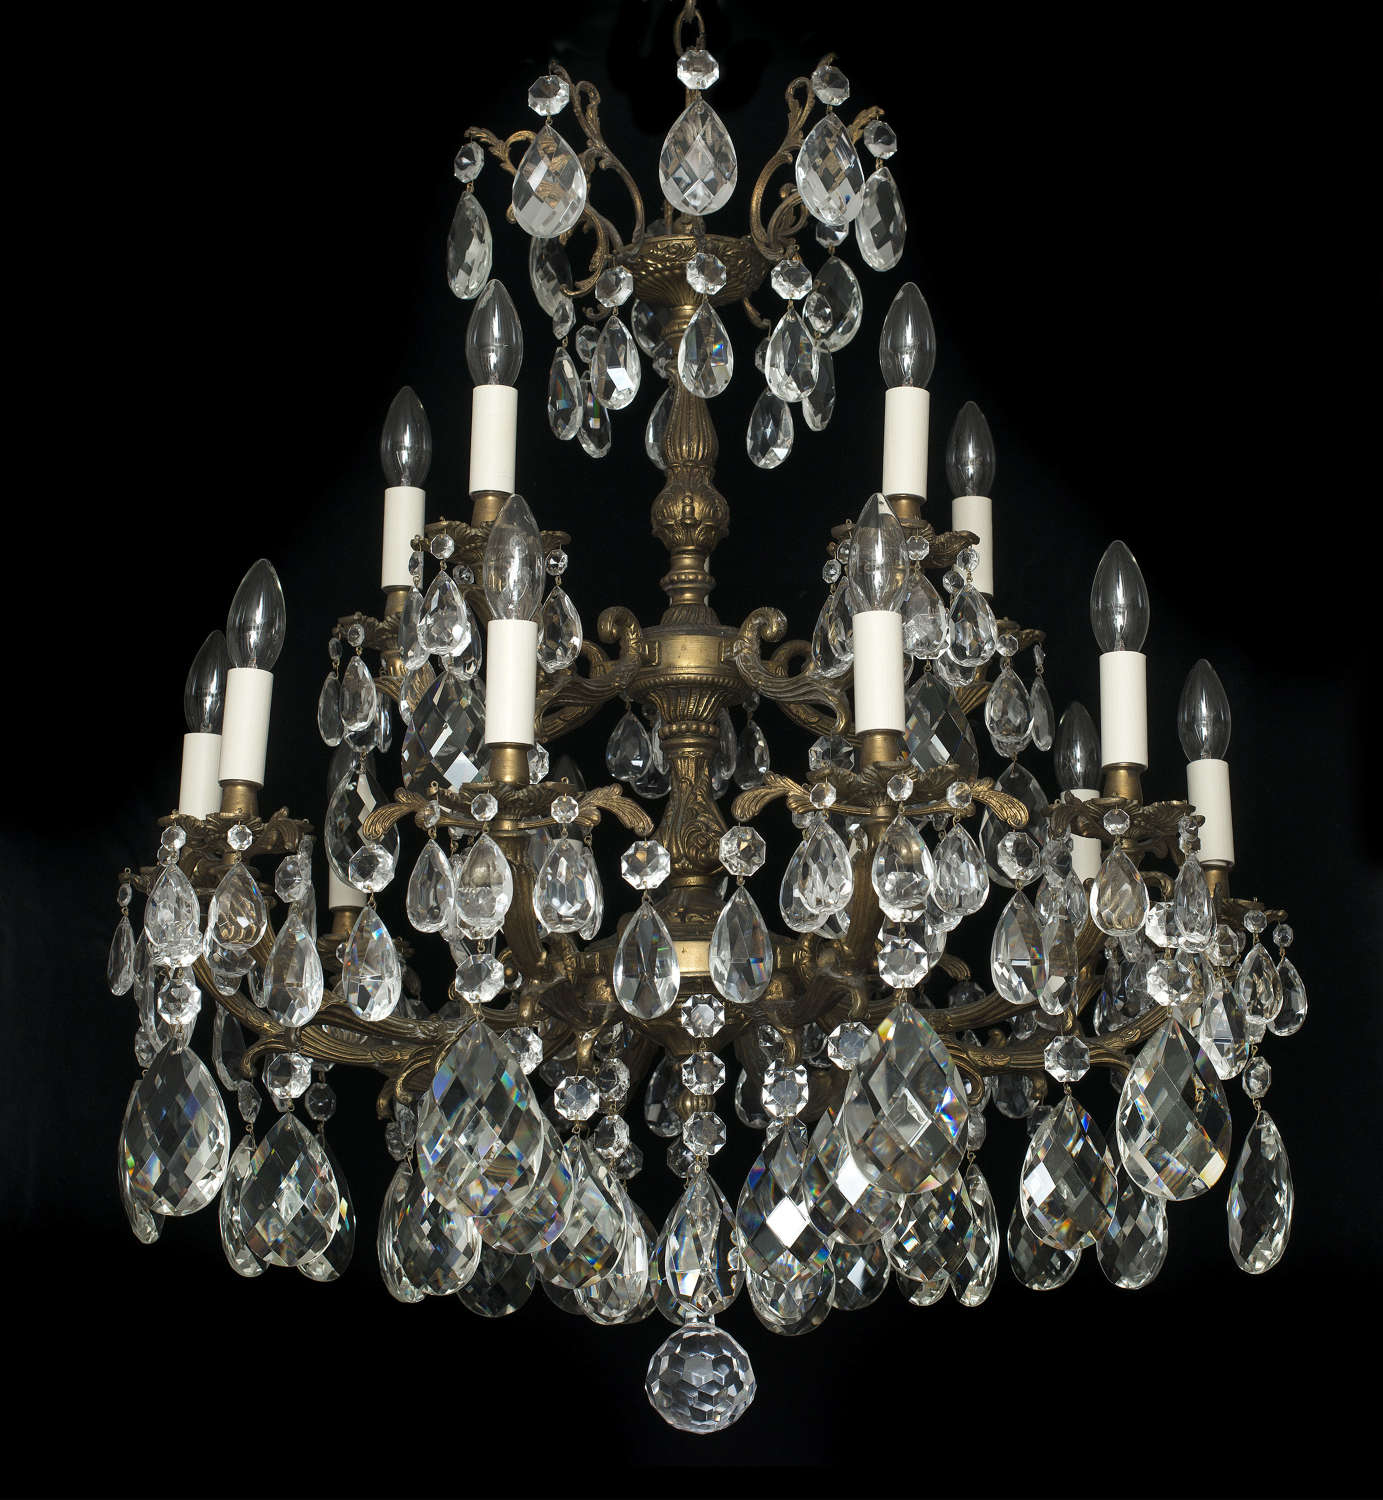 Large PAIR of 15 Light Italian Antique Chandeliers